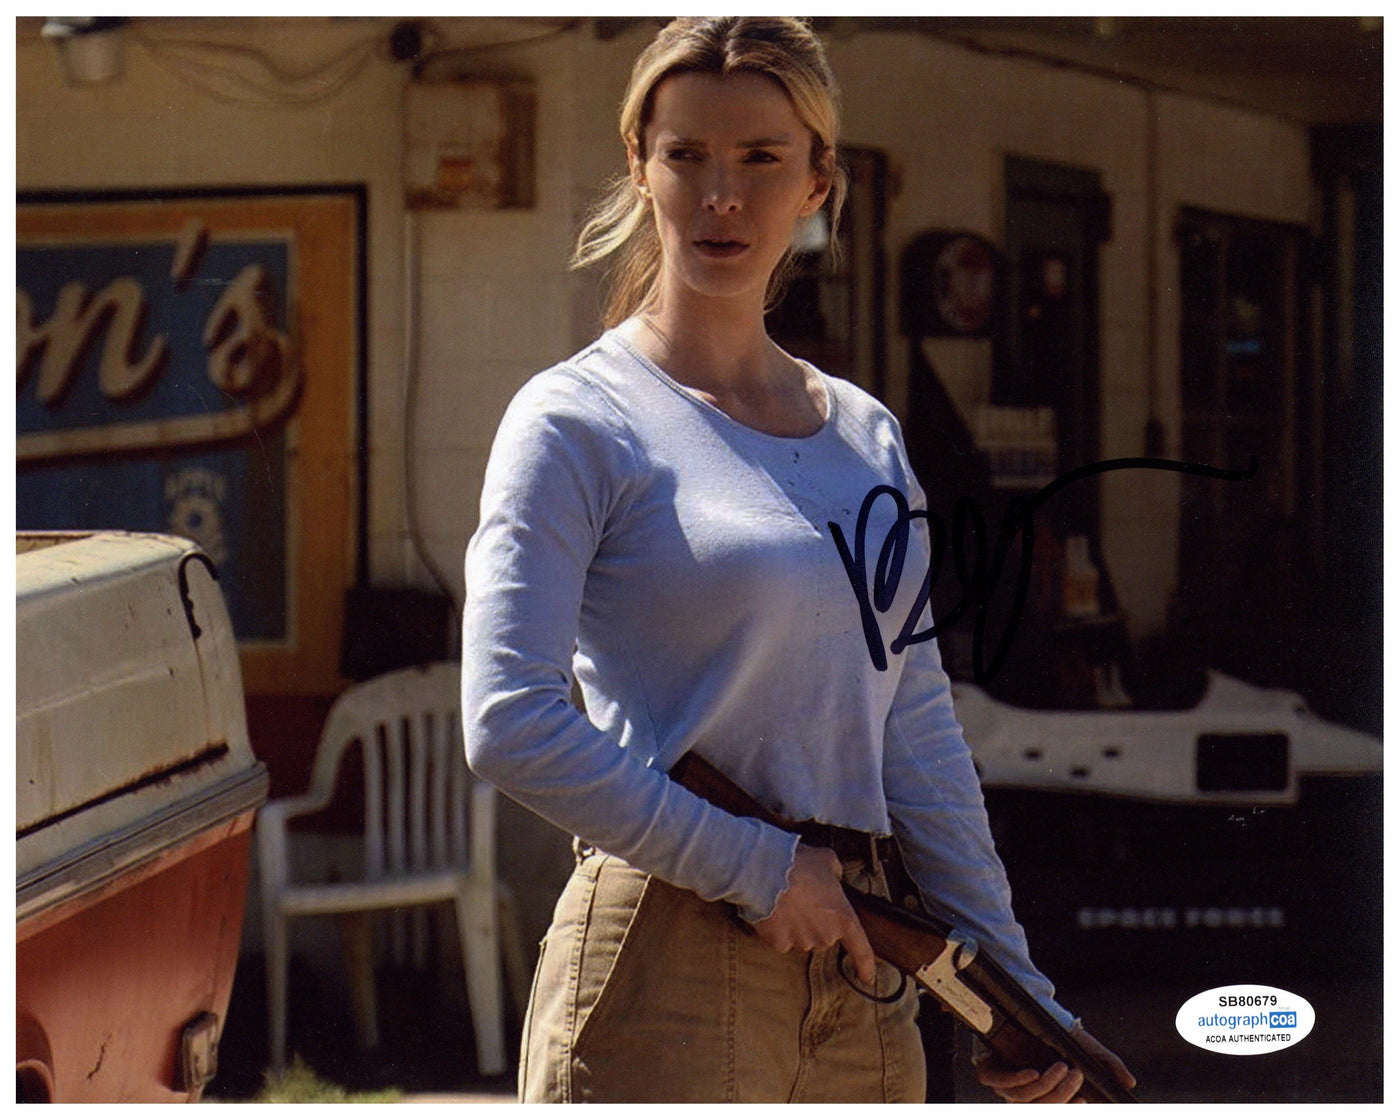 Betty Gilpin Signed 8x10 Photo The Hunt Autographed - AutographCOA